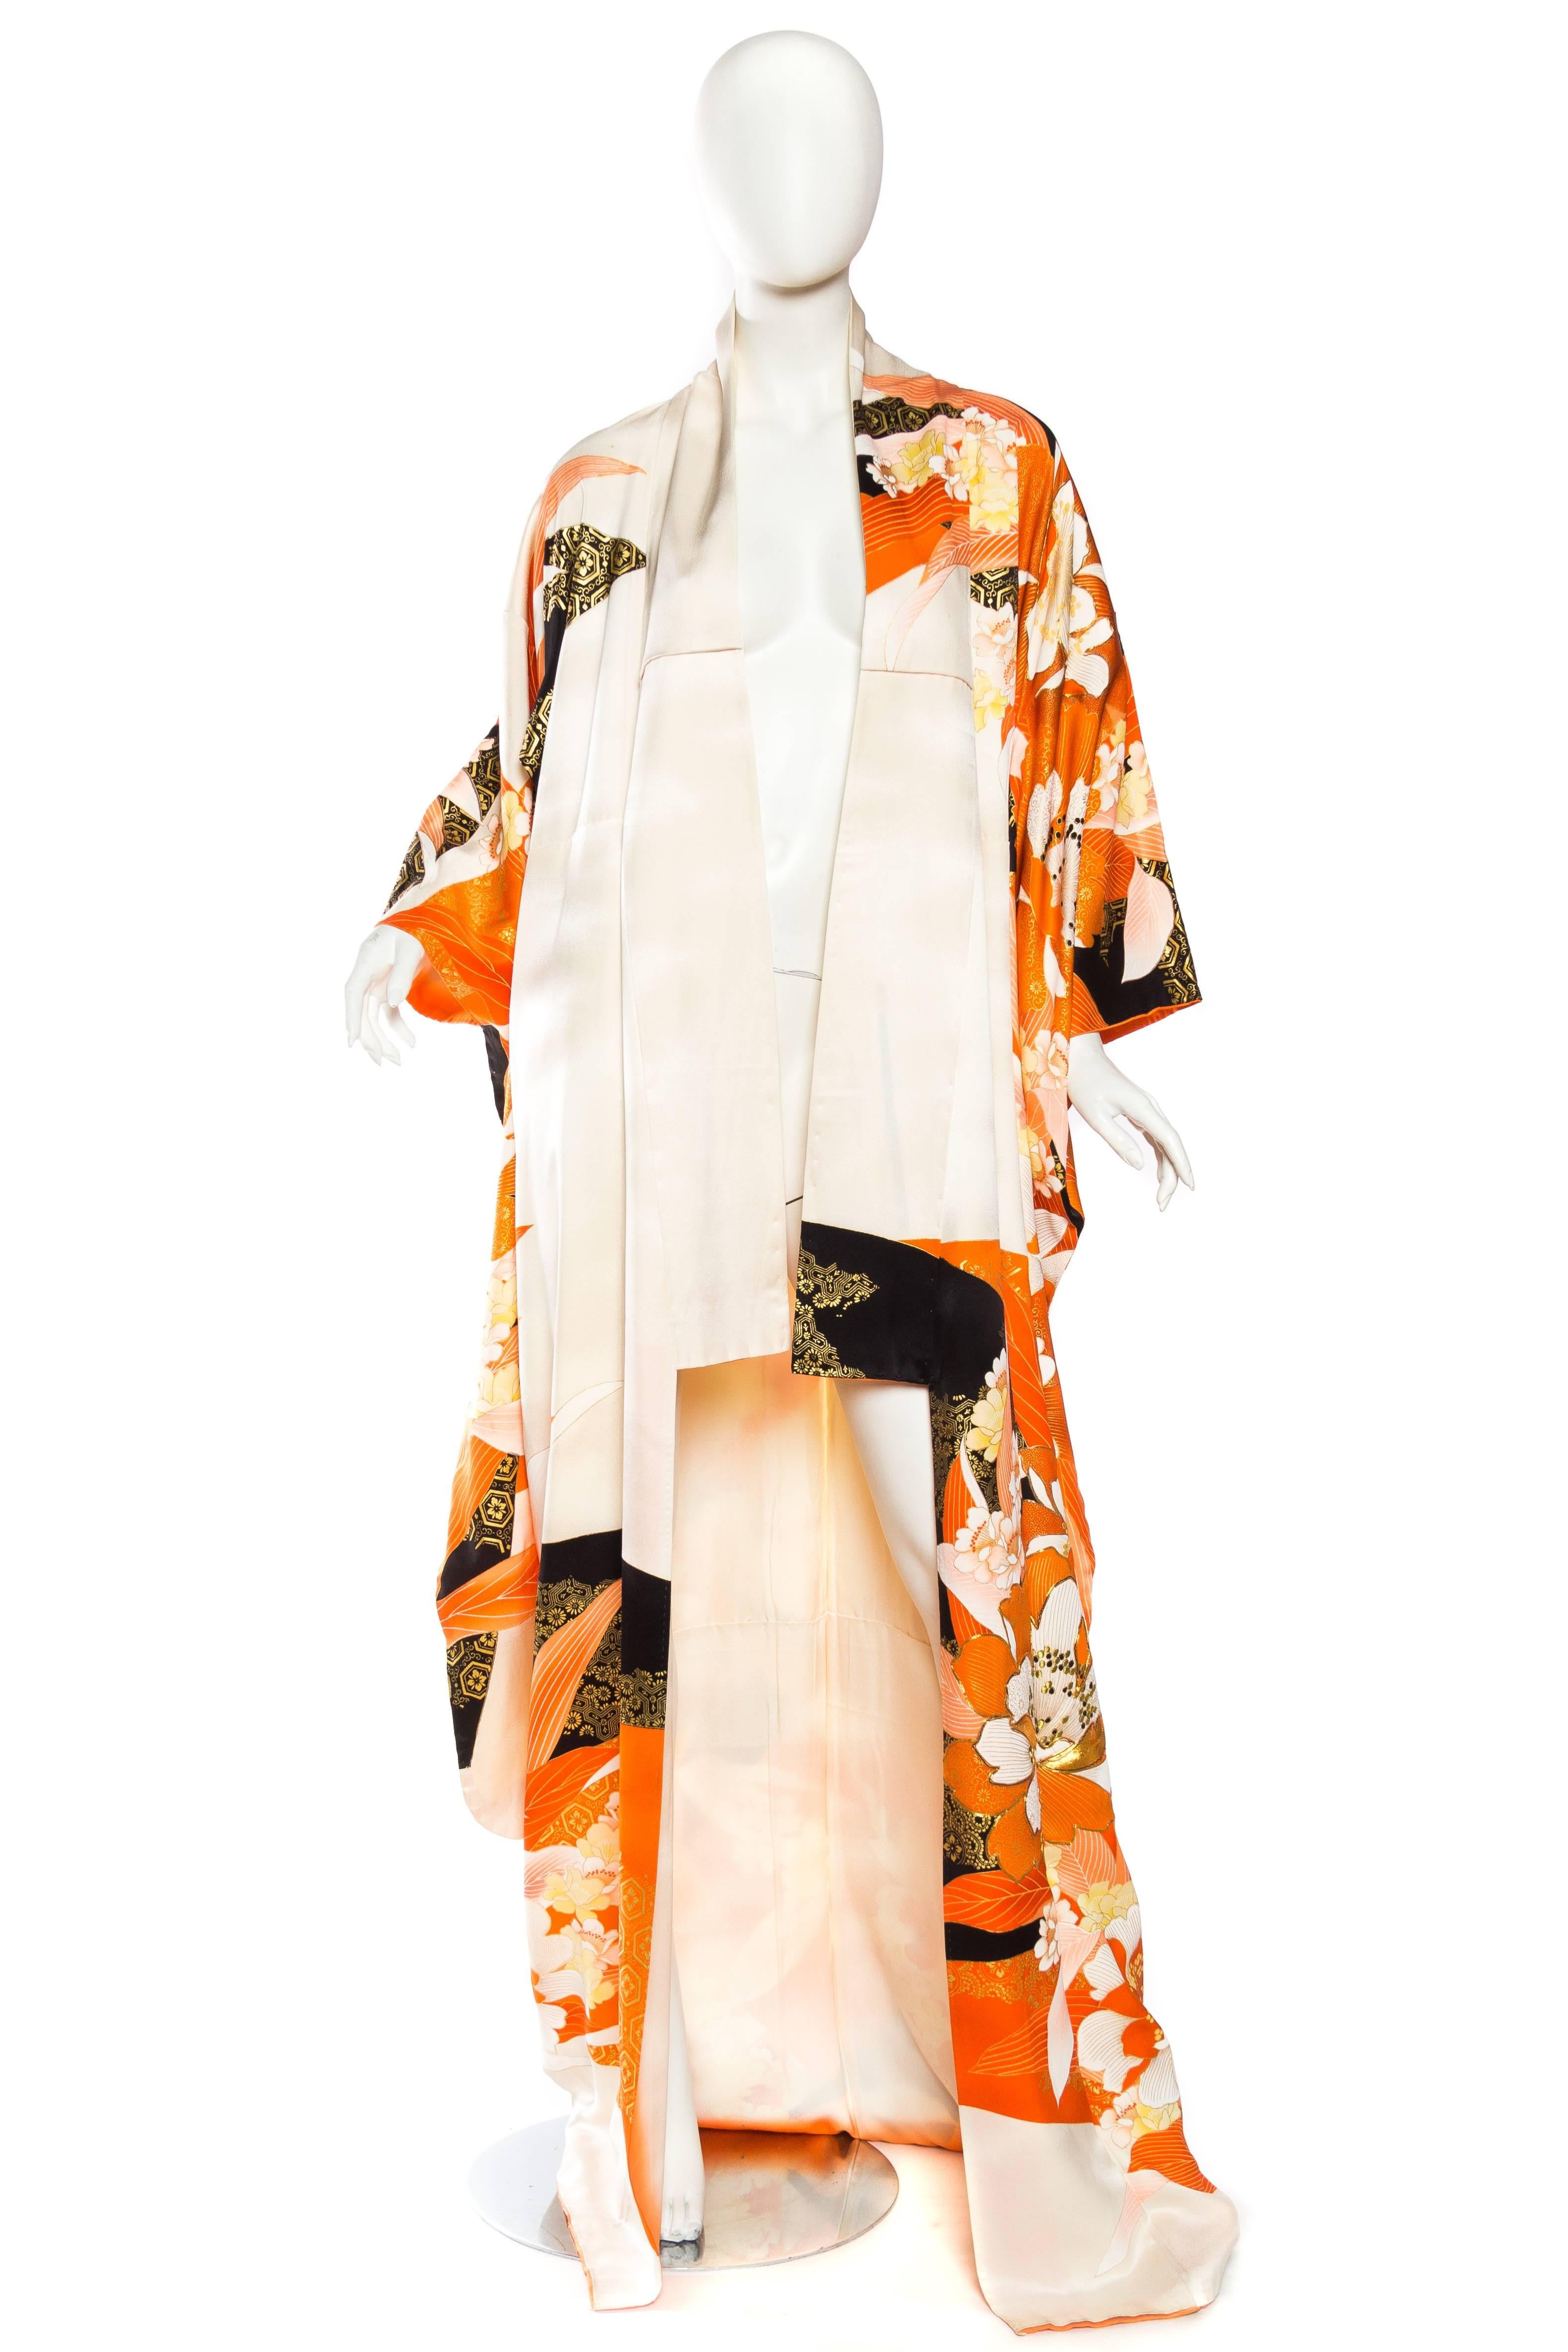 Late Mid-Century Hand Painted and Printed Japanese Kimono in wonderful metallic golden tones set off with black on the cream ground. 